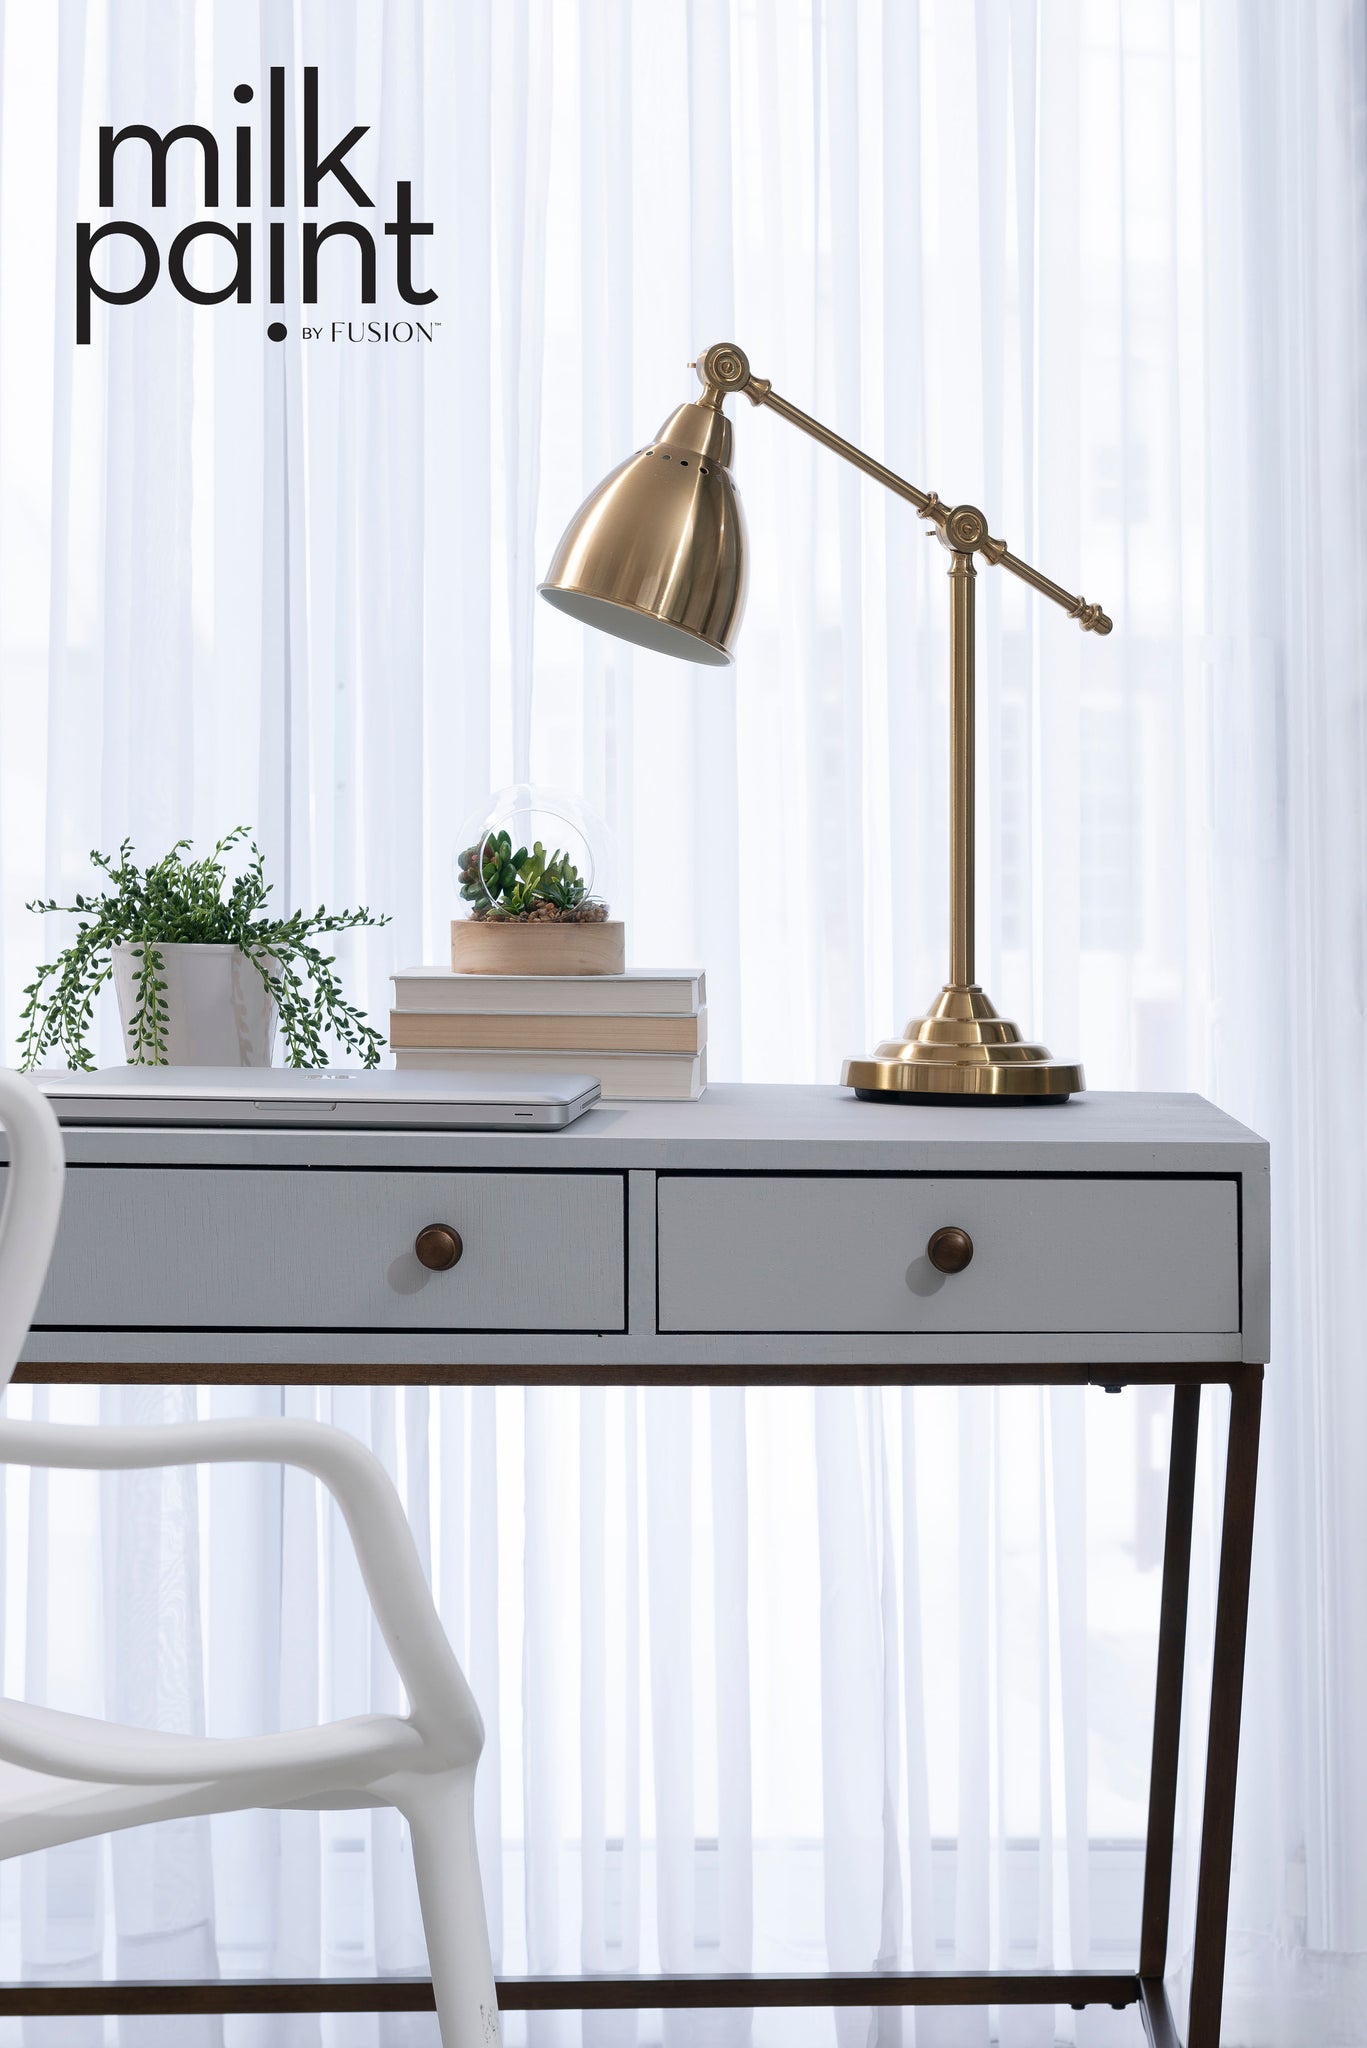 Silver Screen Milk Paint by Fusion